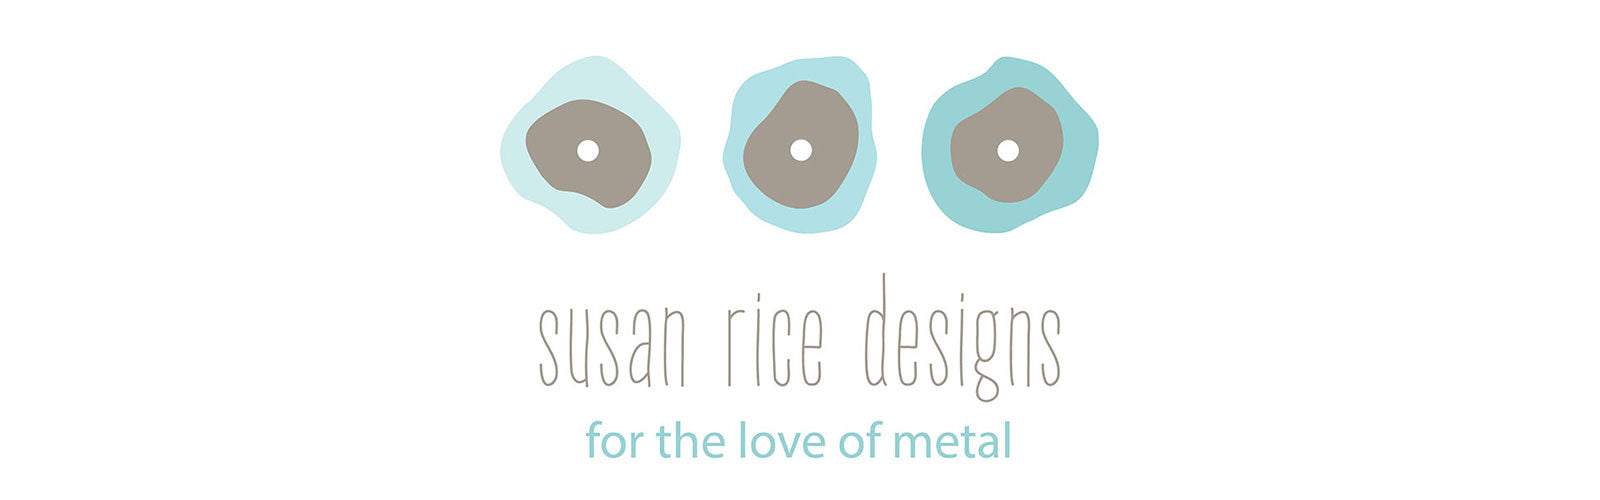 ­What Happened to Susan Rice Designs?